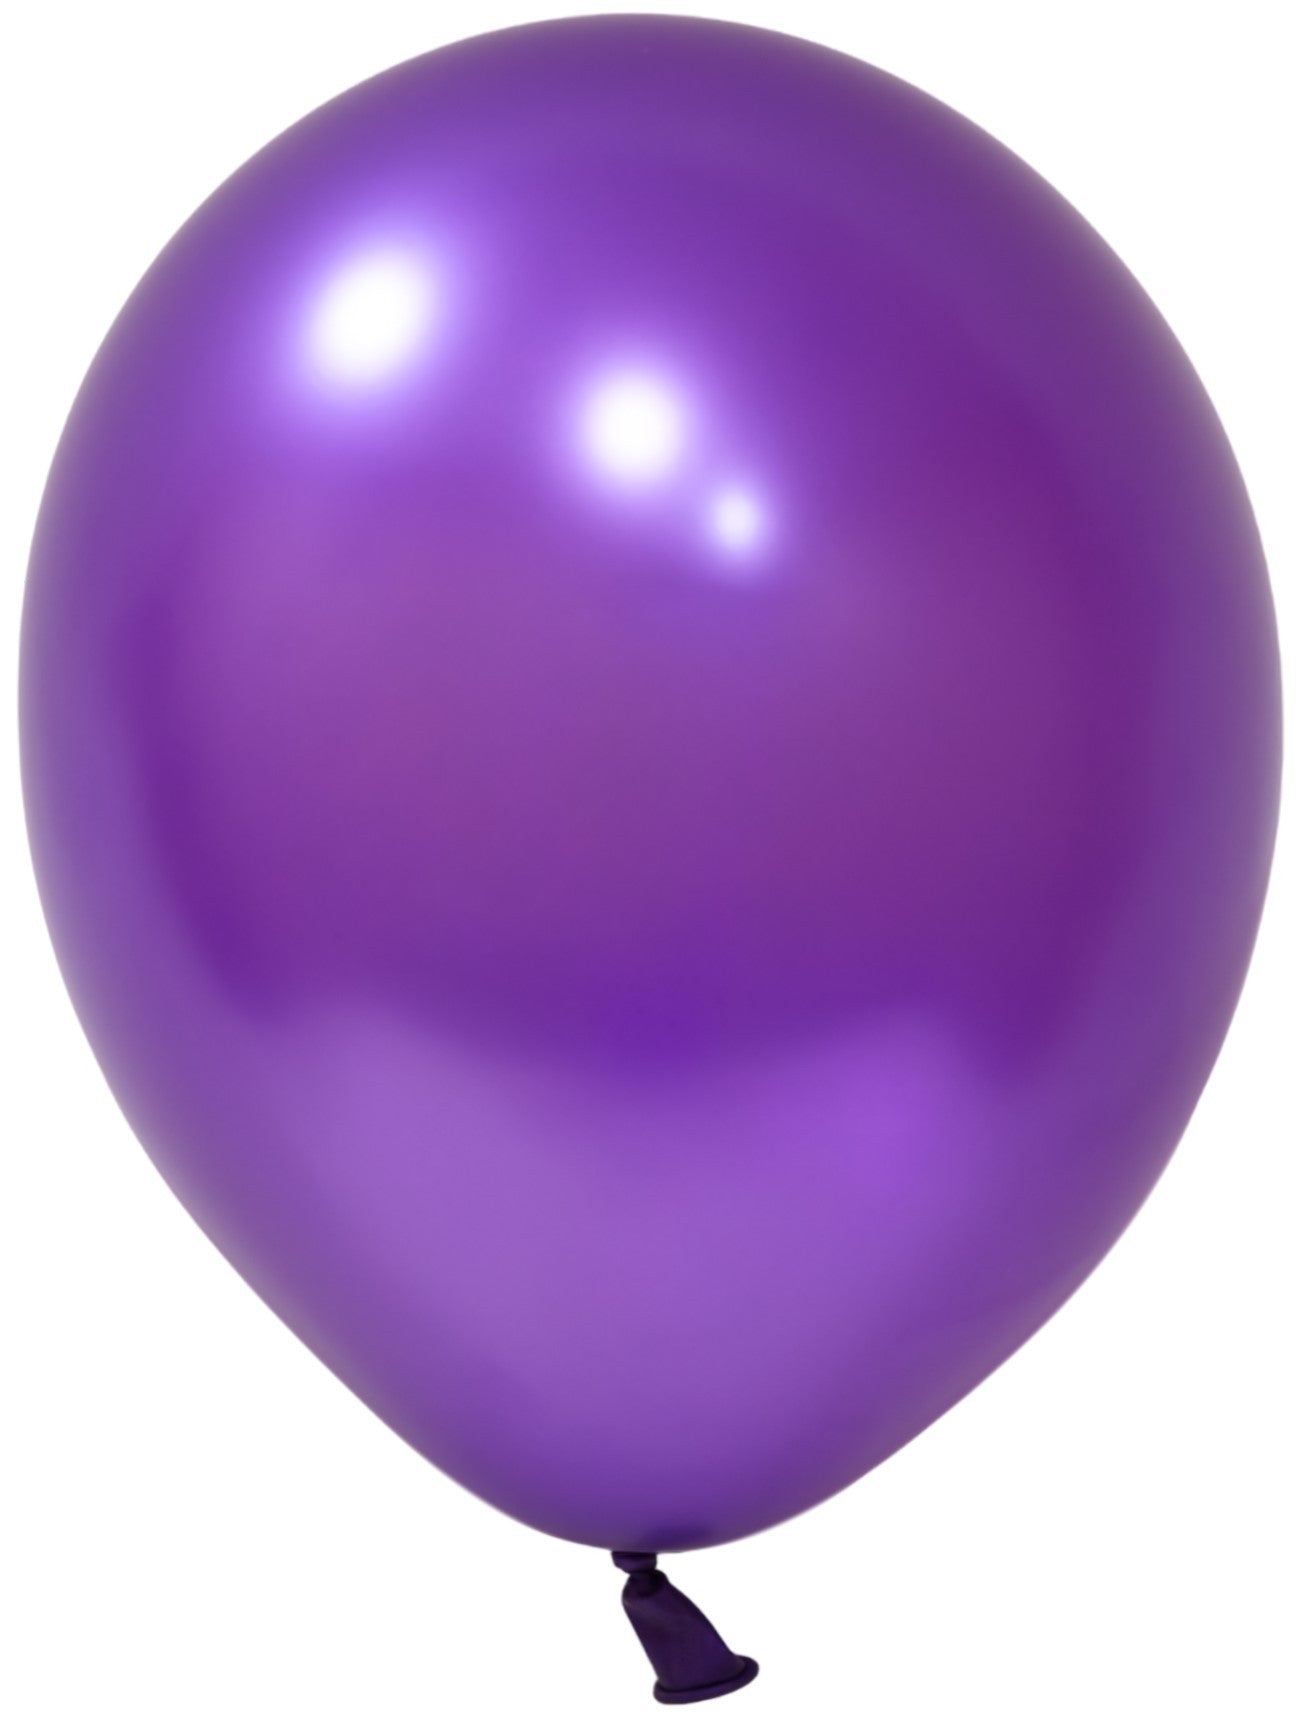 View Violet Metallic Latex Balloon 10inch Pack of 100 information